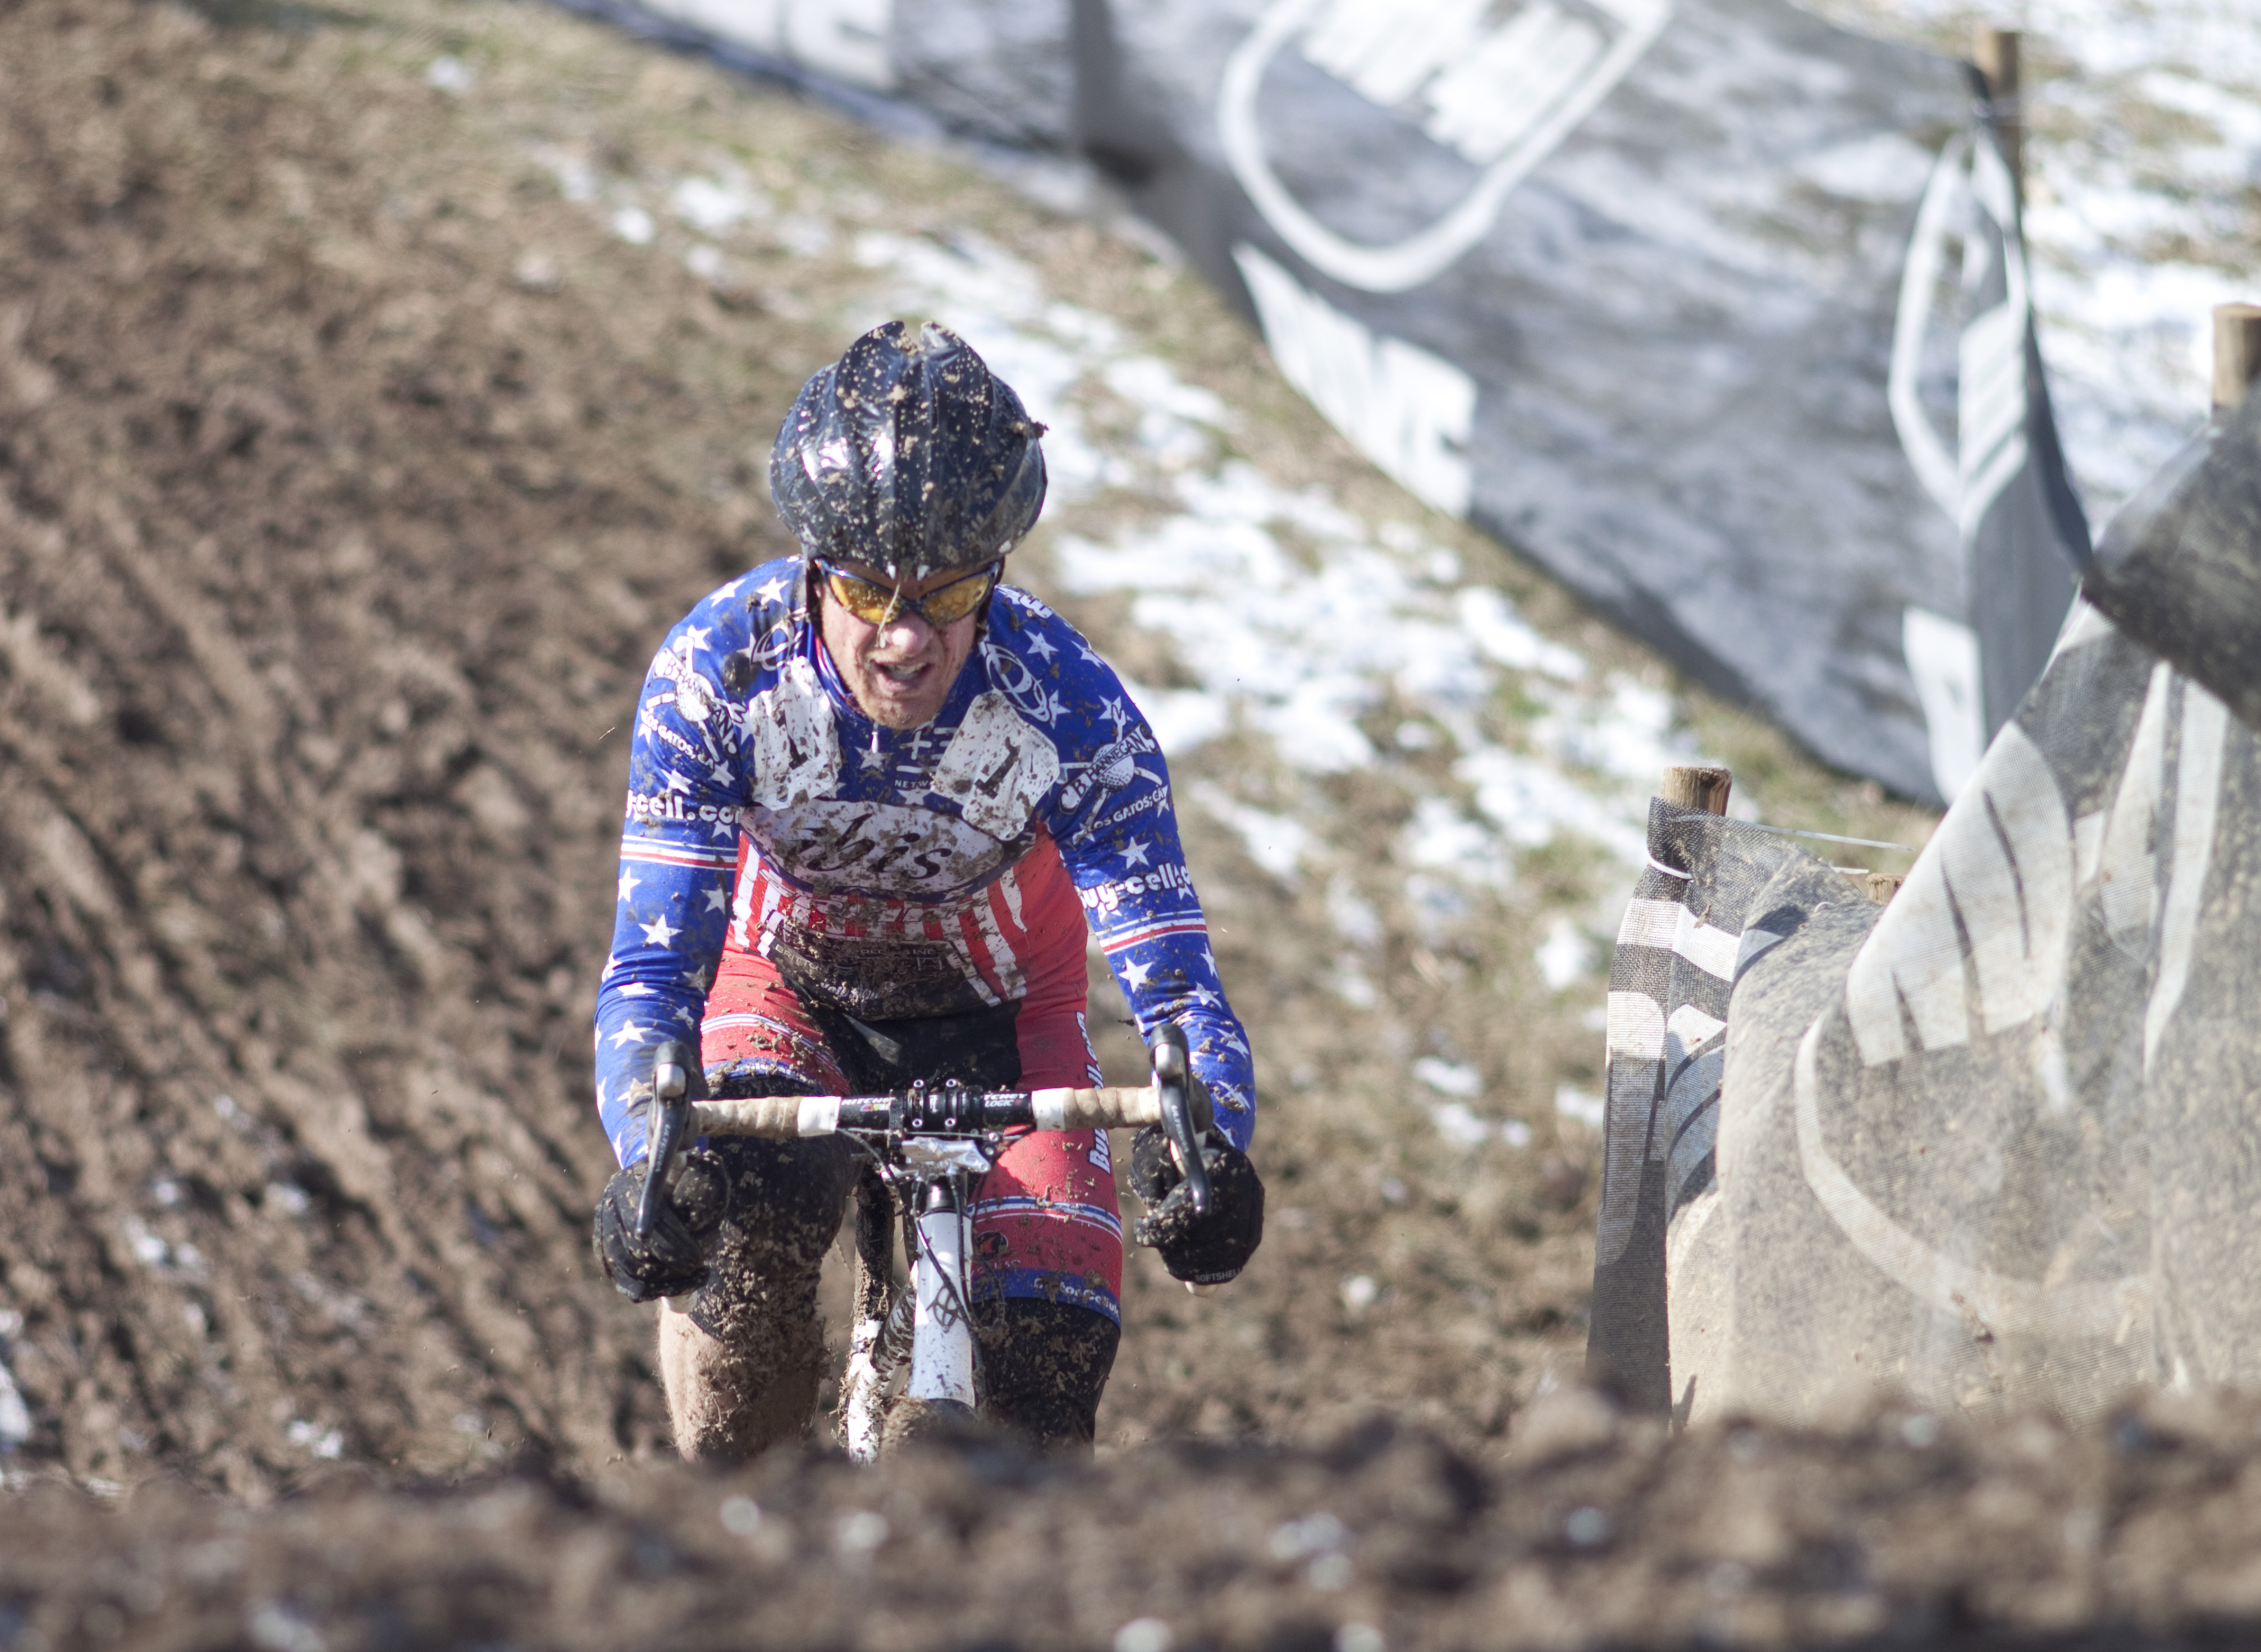 National Champion Don Myrah powers up the hill at the 2013 Cyclocross World Championships, Masters 45-49. © Cyclocross Magazine